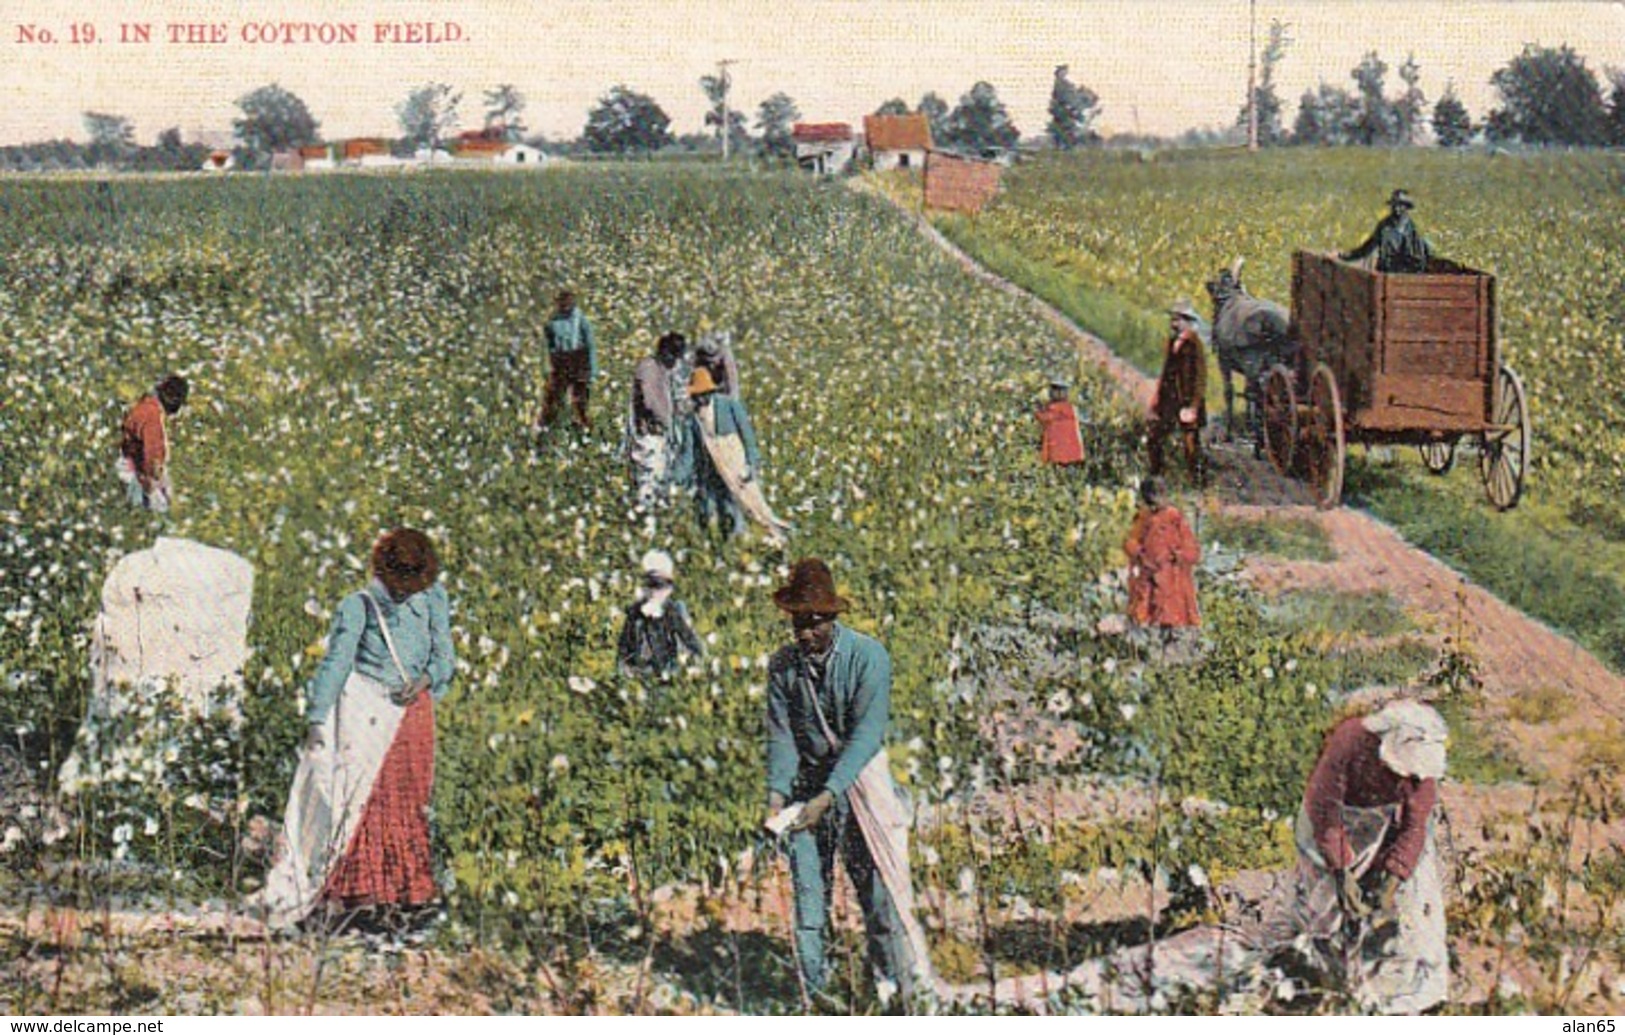 'In The Cotton Field' Black Americana Theme, African-Americans In The South, Agriculture, C1900s Vintage Postcard - Black Americana